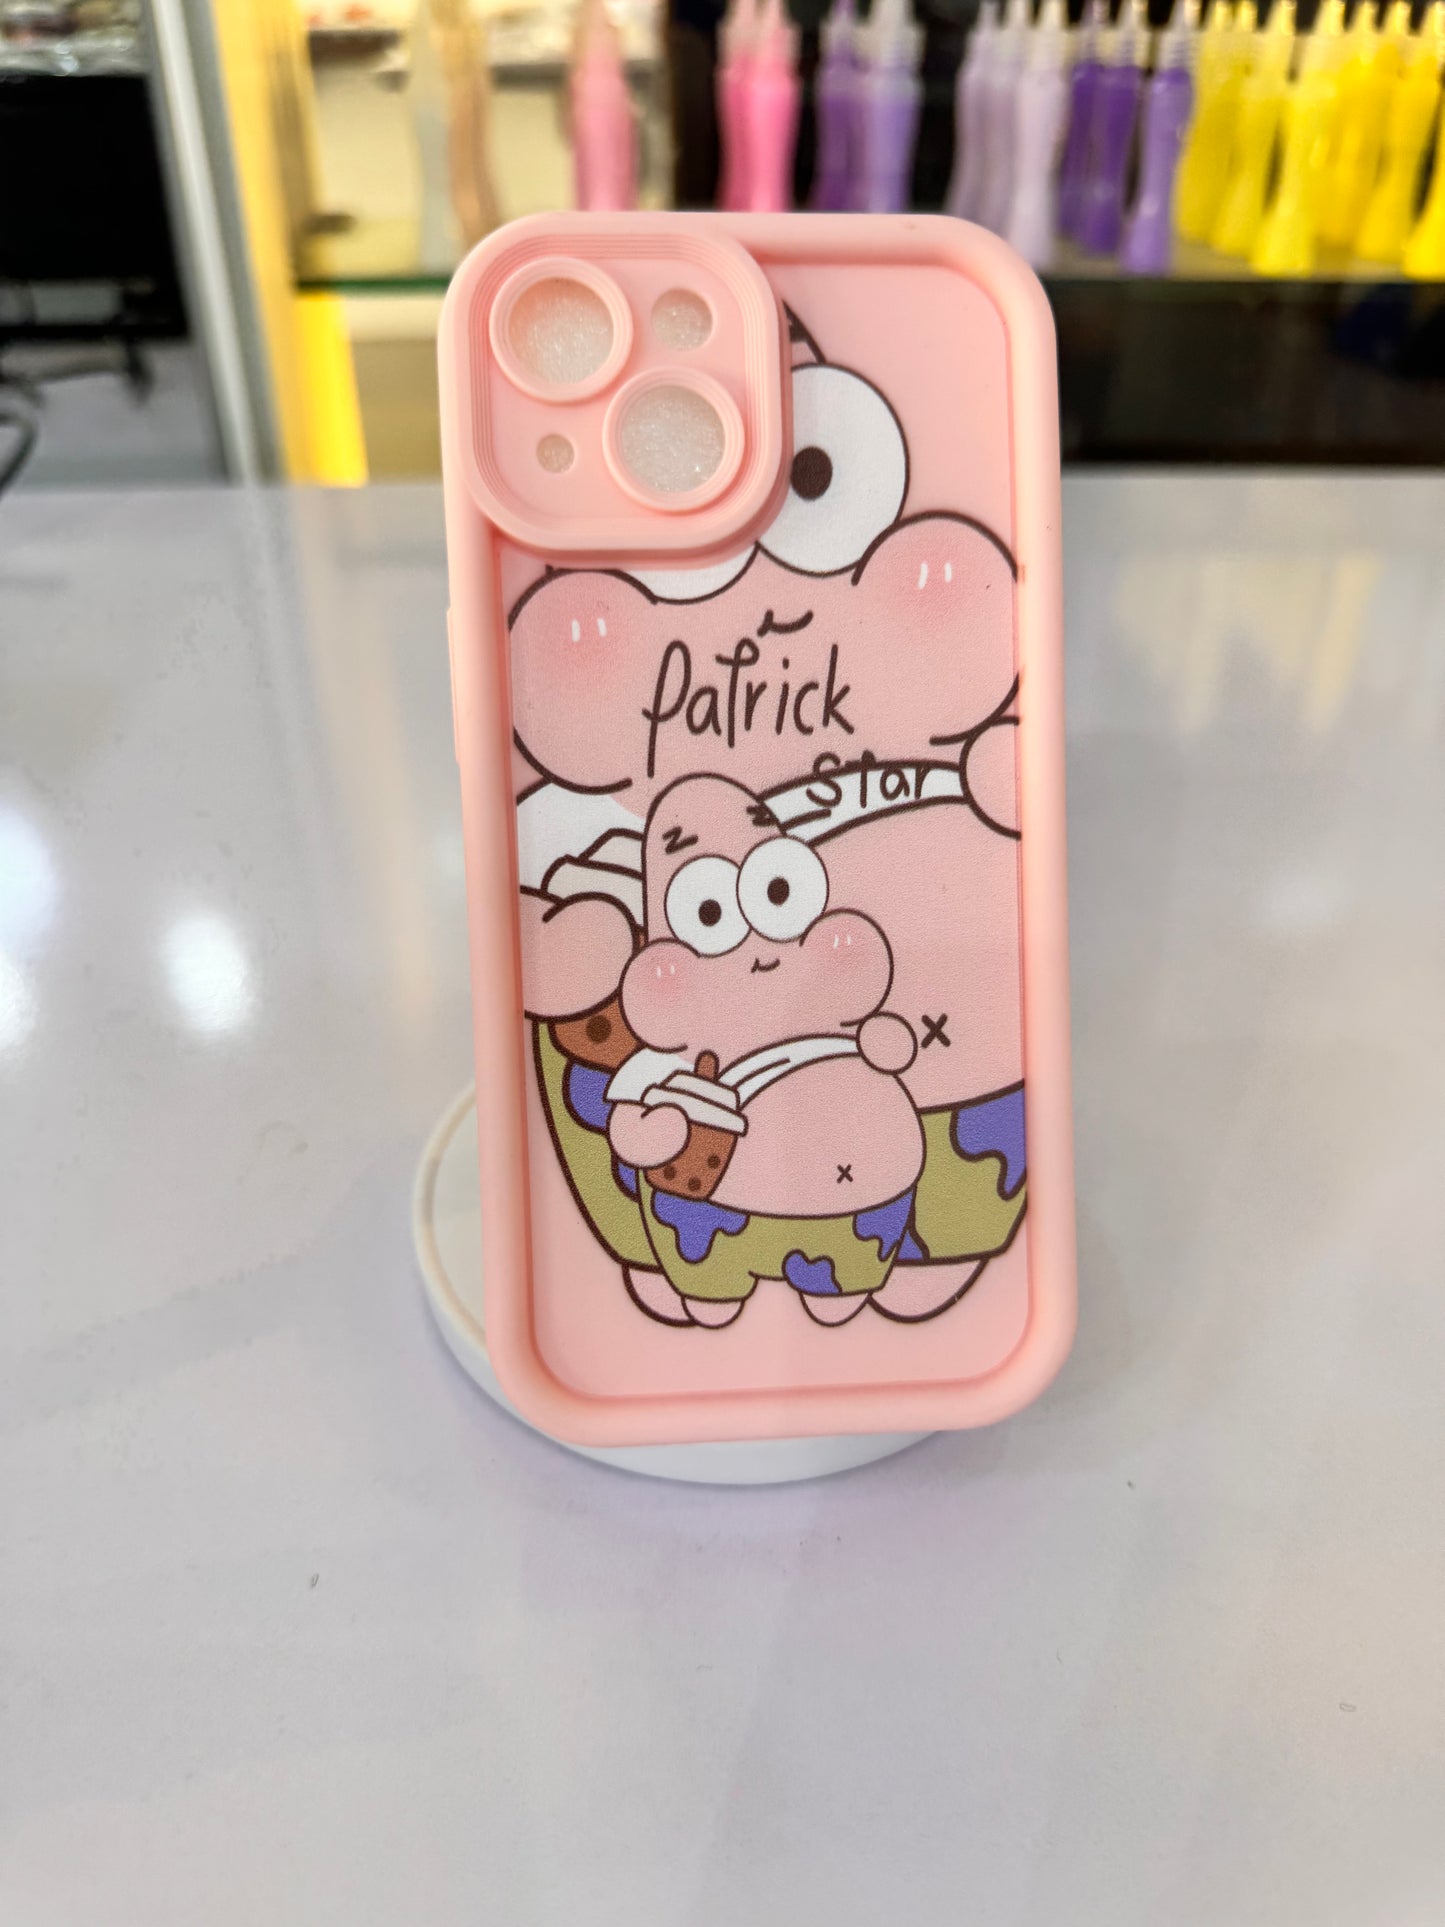 Patrick Star Case for iPhones